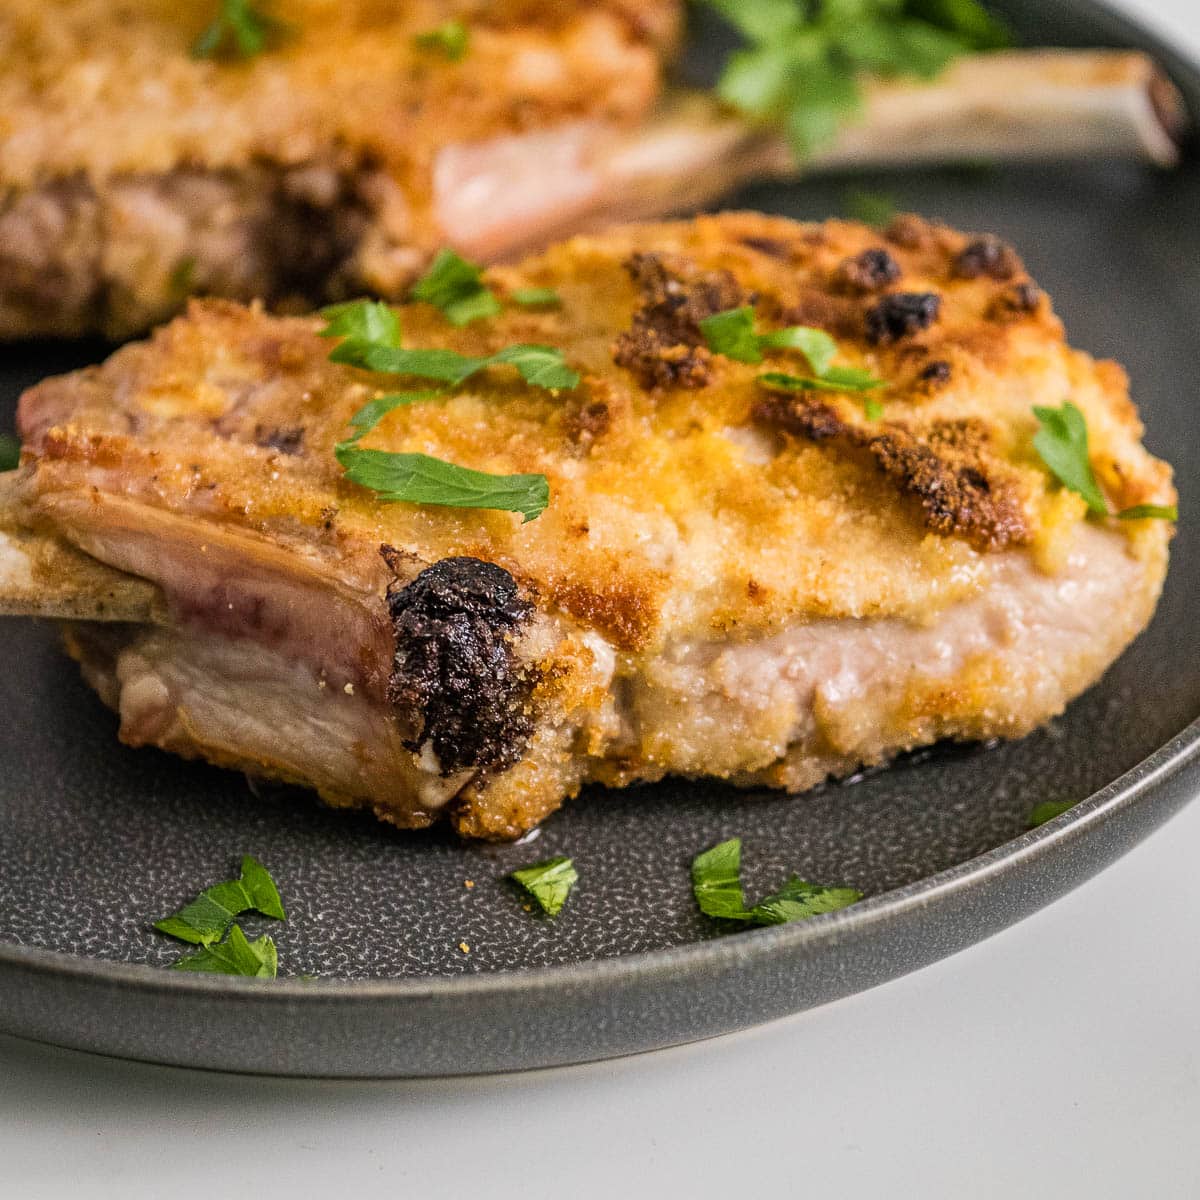 Two breaded pork chops on a gray plate with parsley.